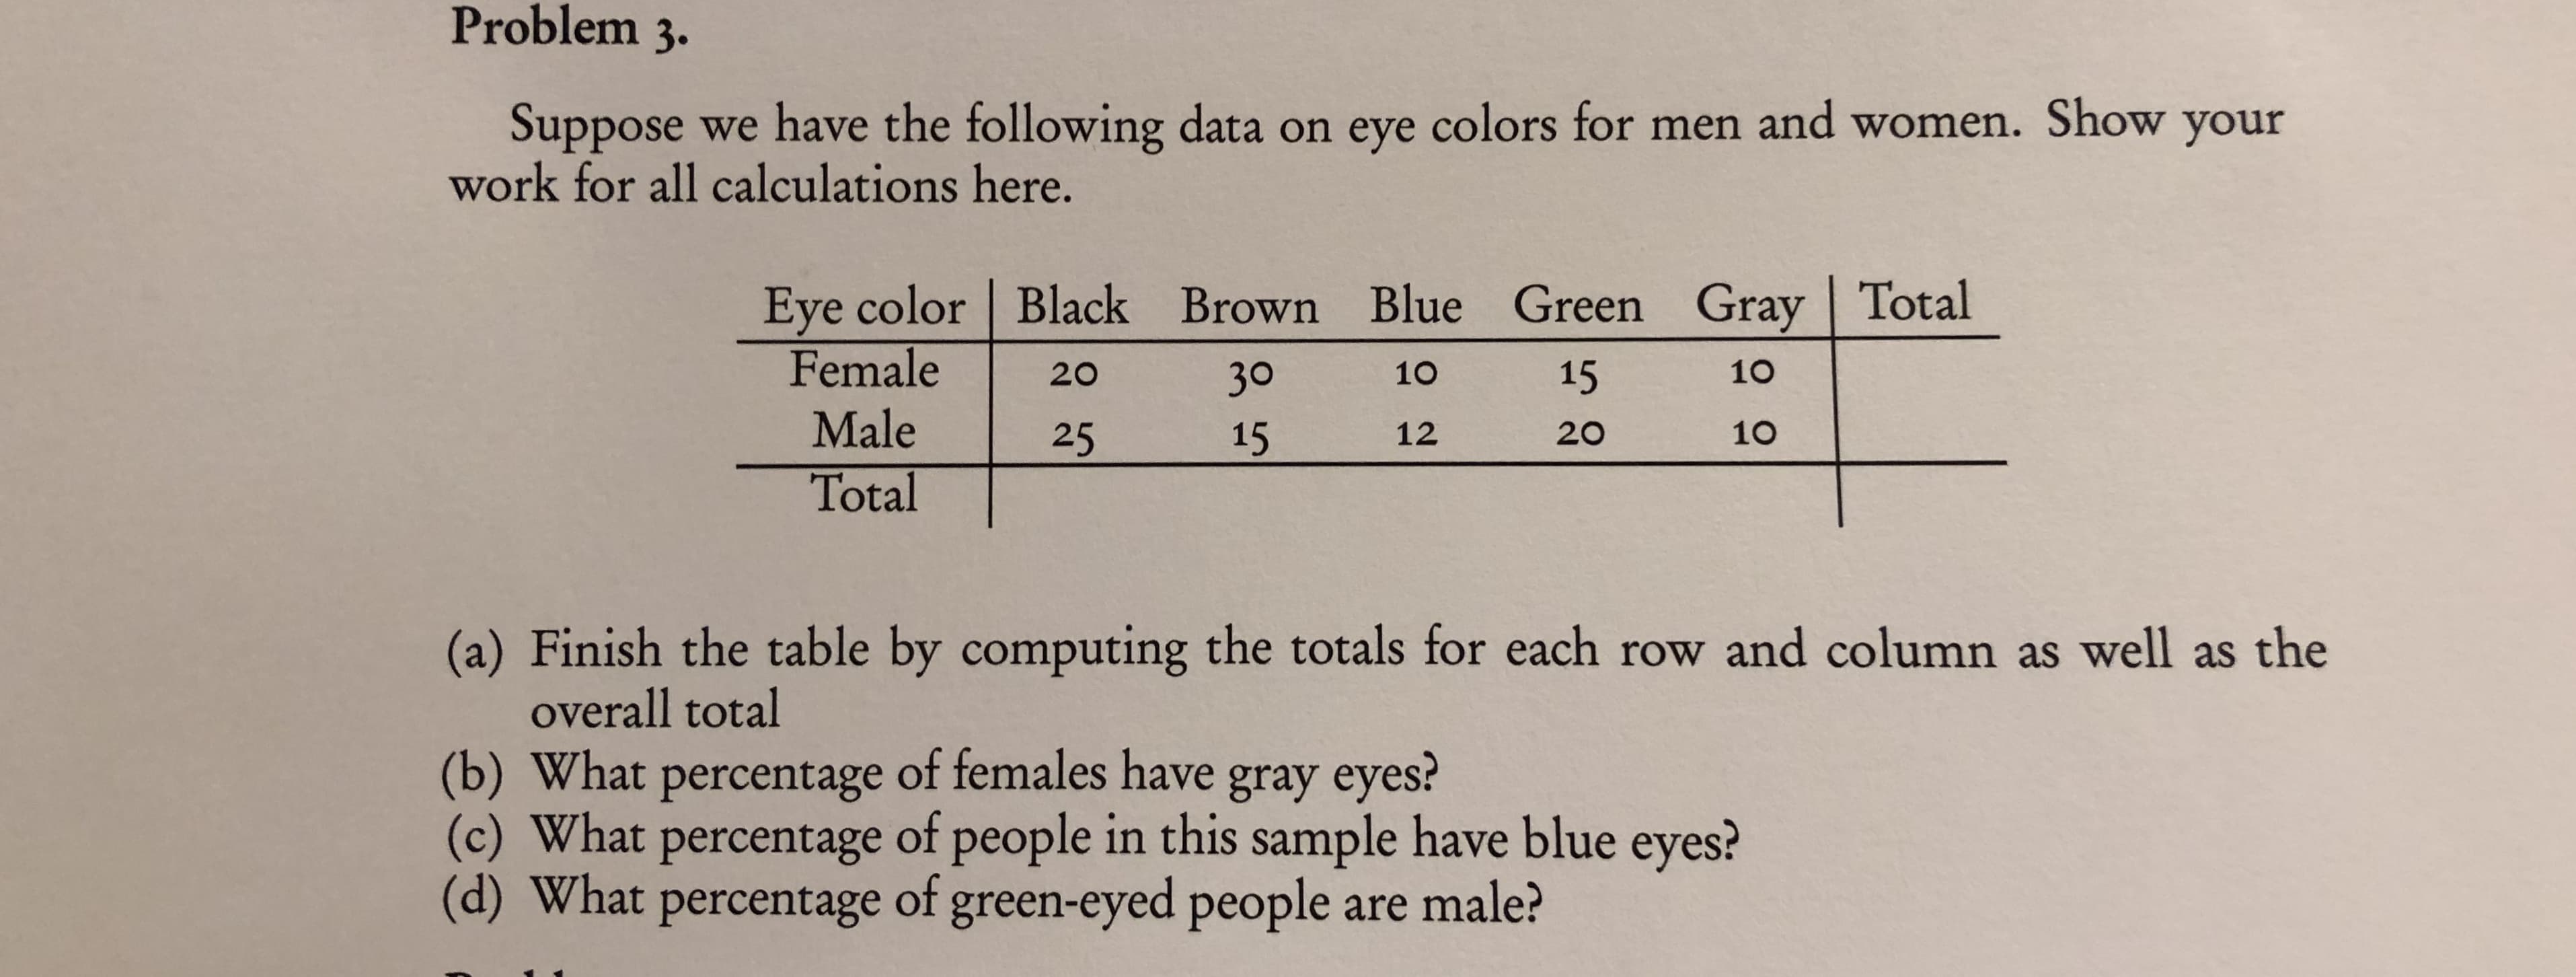 Problem 3.
Suppose we have the following data on eye colors for men and women. Show your
work for all calculations here.
Eye color Black Brown Blue Green Gray Total
Female
Male
10
15
30
10
20
20
10
25
12
15
Total
(a) Finish the table by computing the totals for each row and column as well as the
overall total
(b) What percentage of females have gray eyes?
(c) What percentage of people in this sample have blue eyes?
(d) What percentage of green-eyed people are male?
